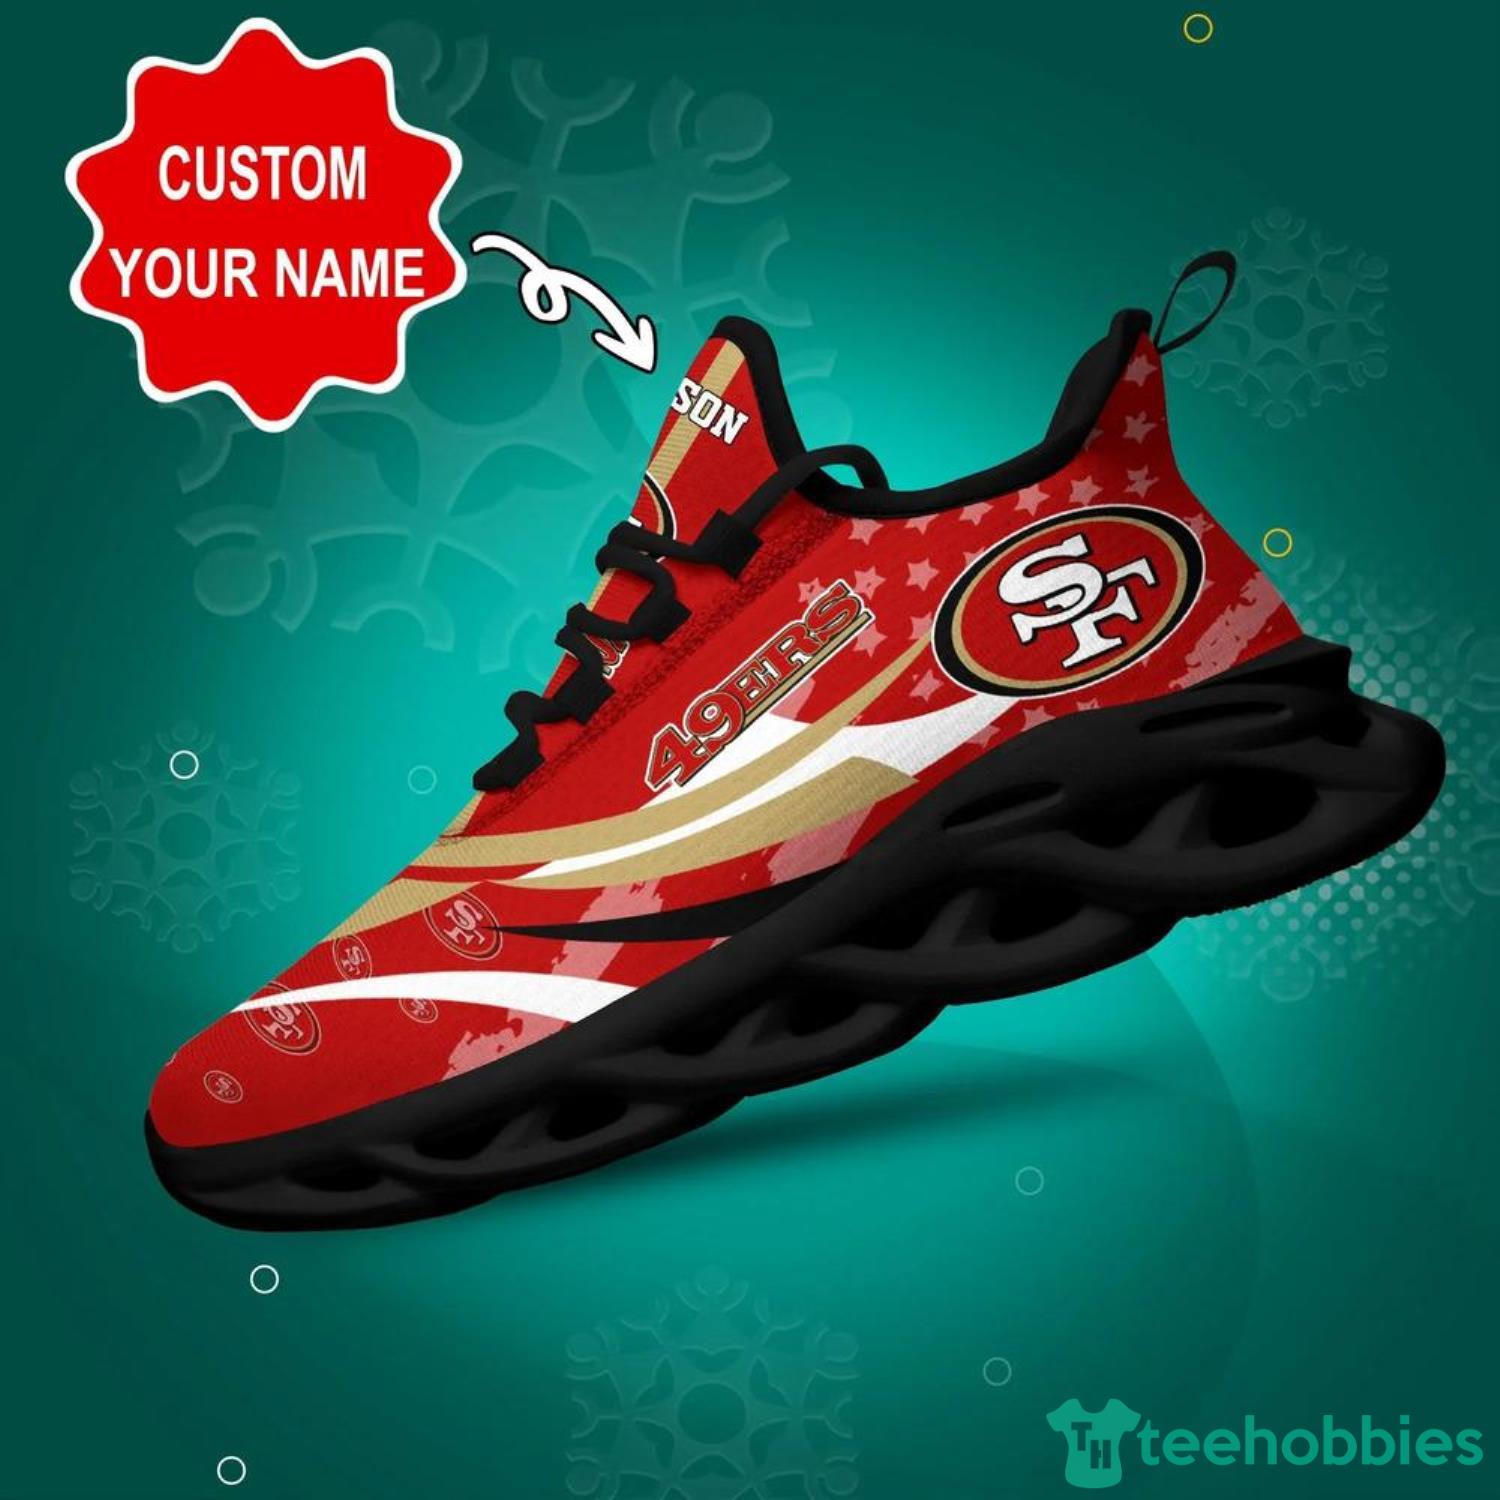 San Francisco 49Ers NFL Fans Max Soul Shoes Custom Name Sneakers For Men And Women - San Francisco 49Ers NFL Max Soul Shoes Custom Name, Sneakers Hot Trending Personalized Gifts For NFL Fans_1